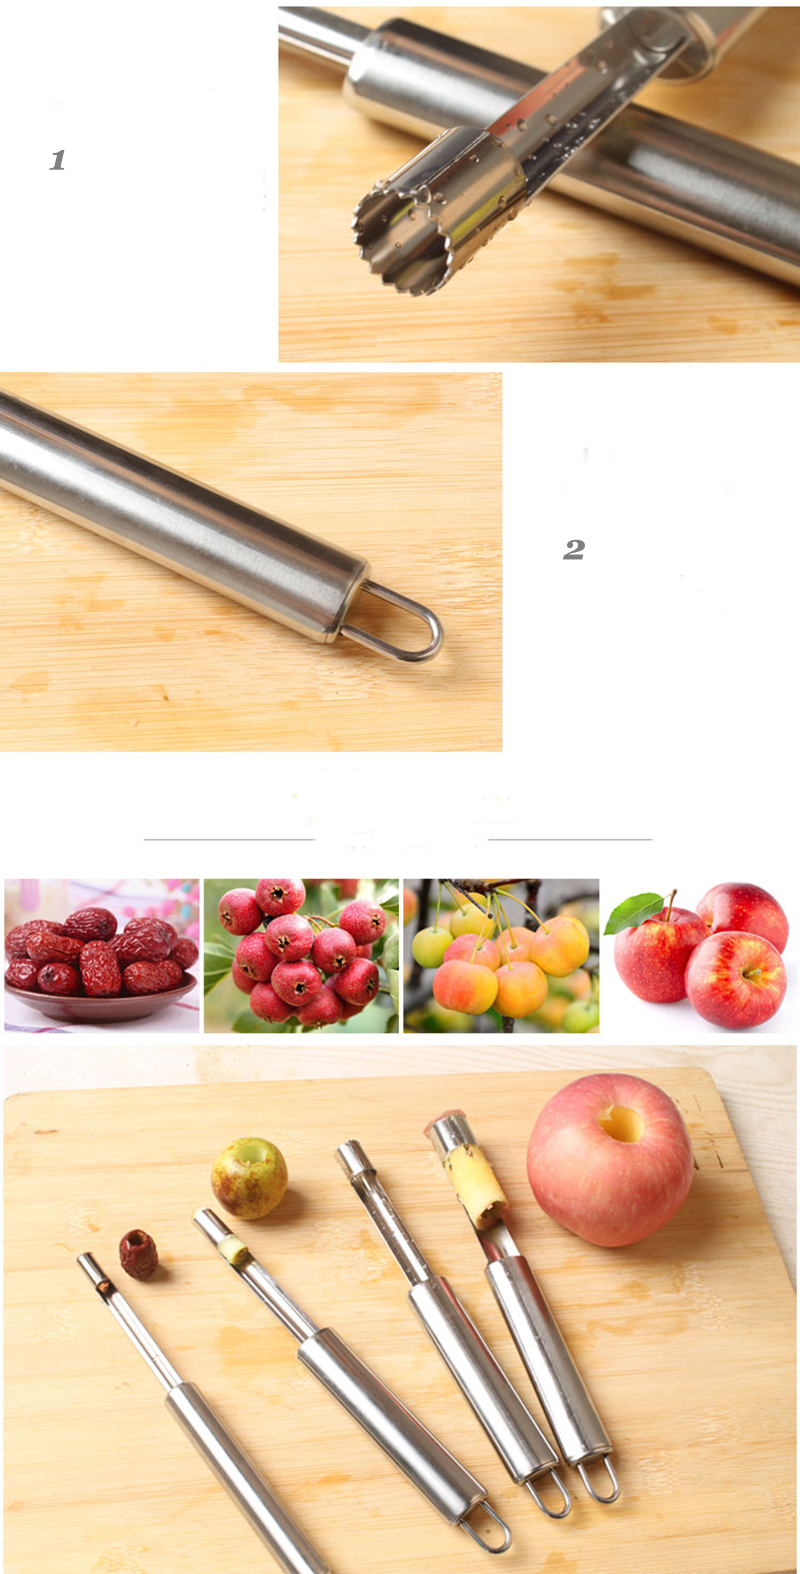 Stainless-Steel-Apple-Core-Remover-Hawthorn-Jujube-Sydney-Corer-Fruit-Coring-Device-Digging-Tool-Fru-1626072-8